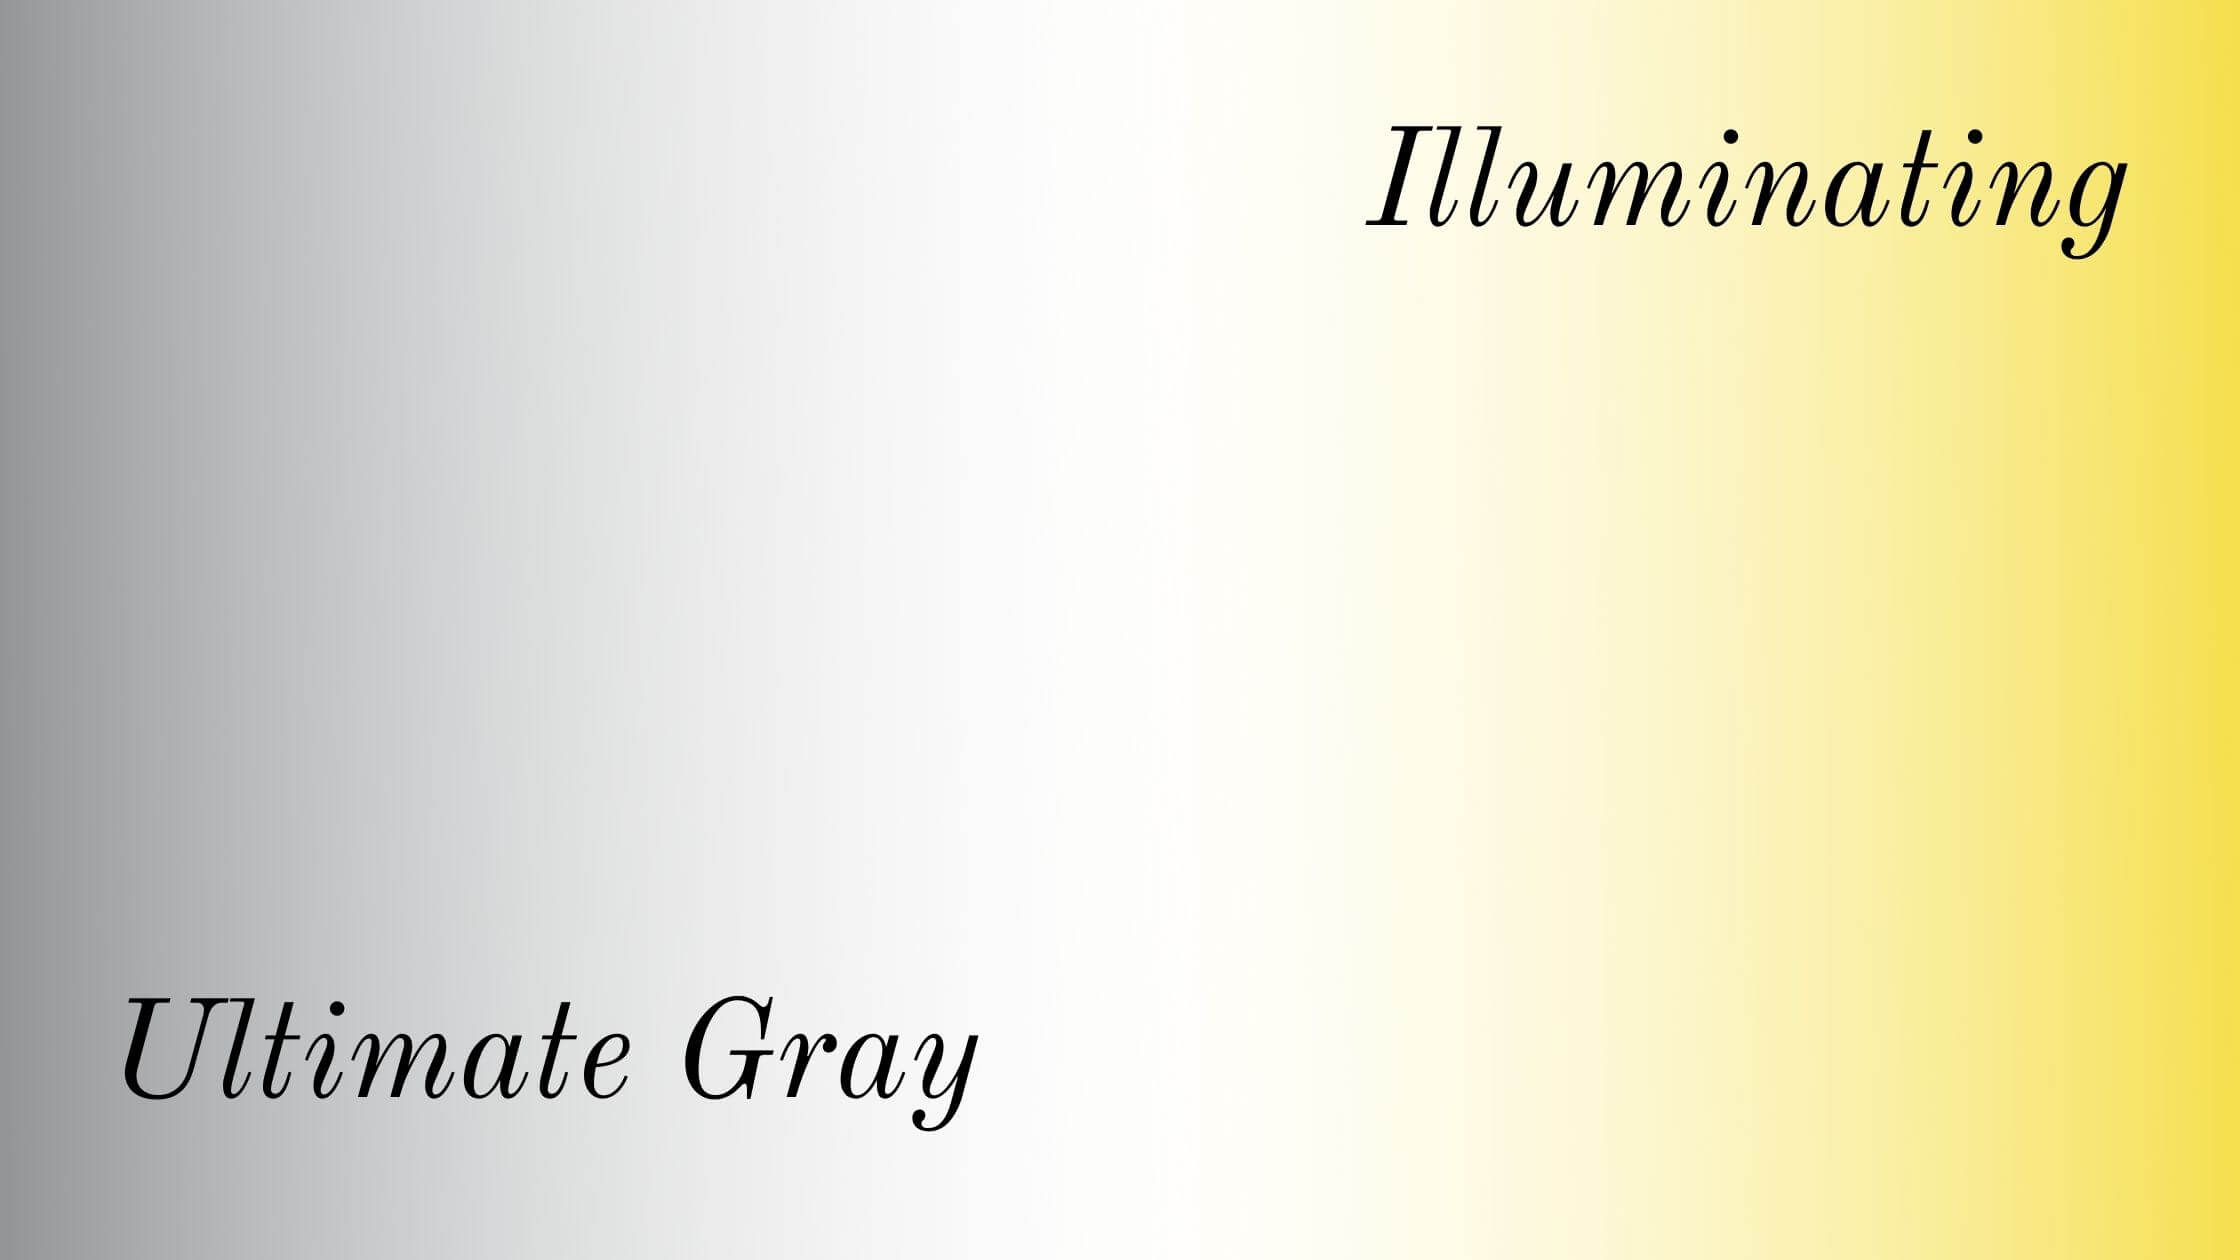 Design Trends 2021: Pantone's color pairing for the year 2021 is Ultimate Gray and Illuminating